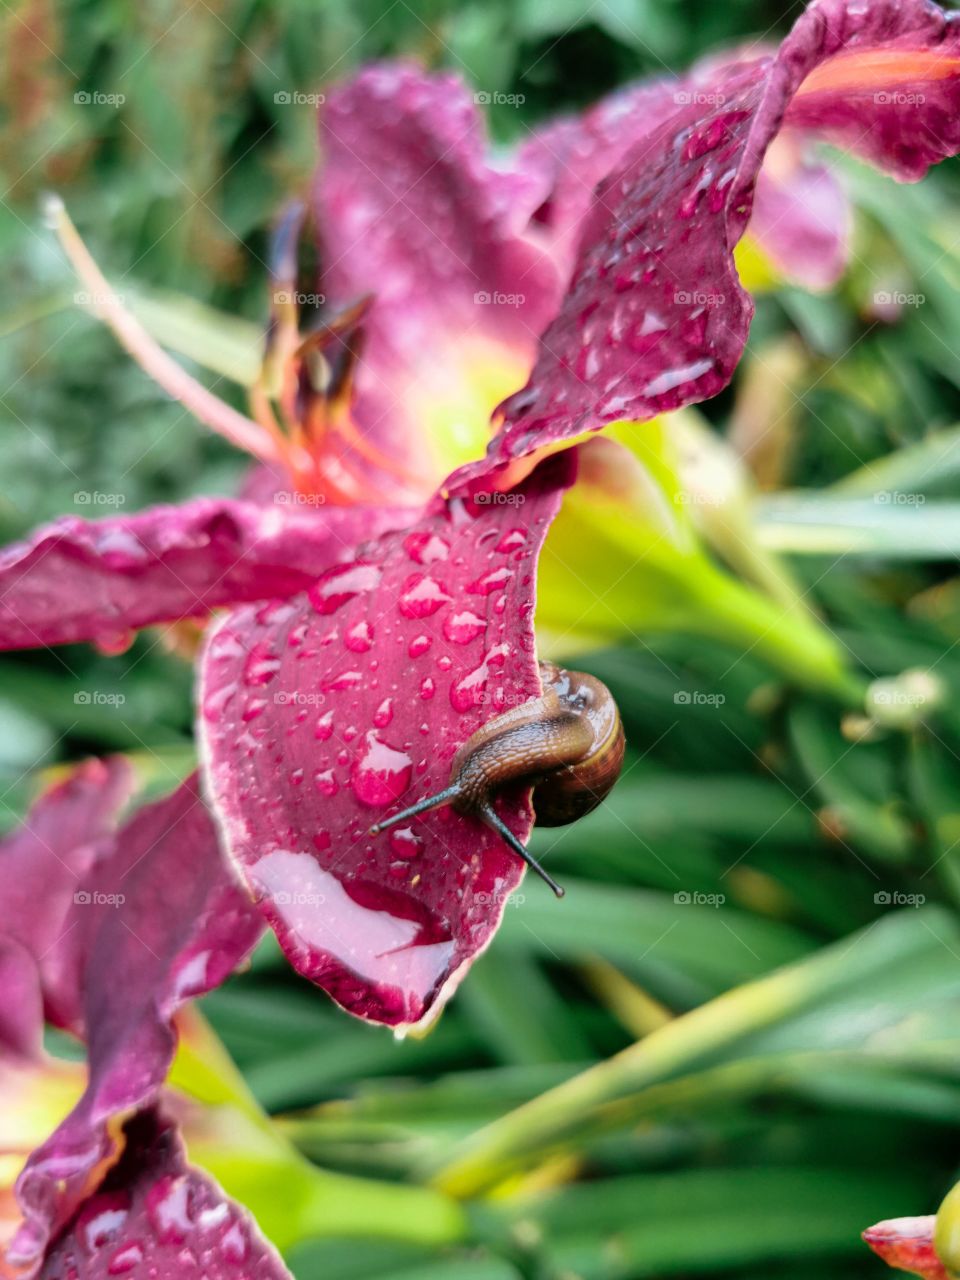 Snail is looking at its reflection in water drop